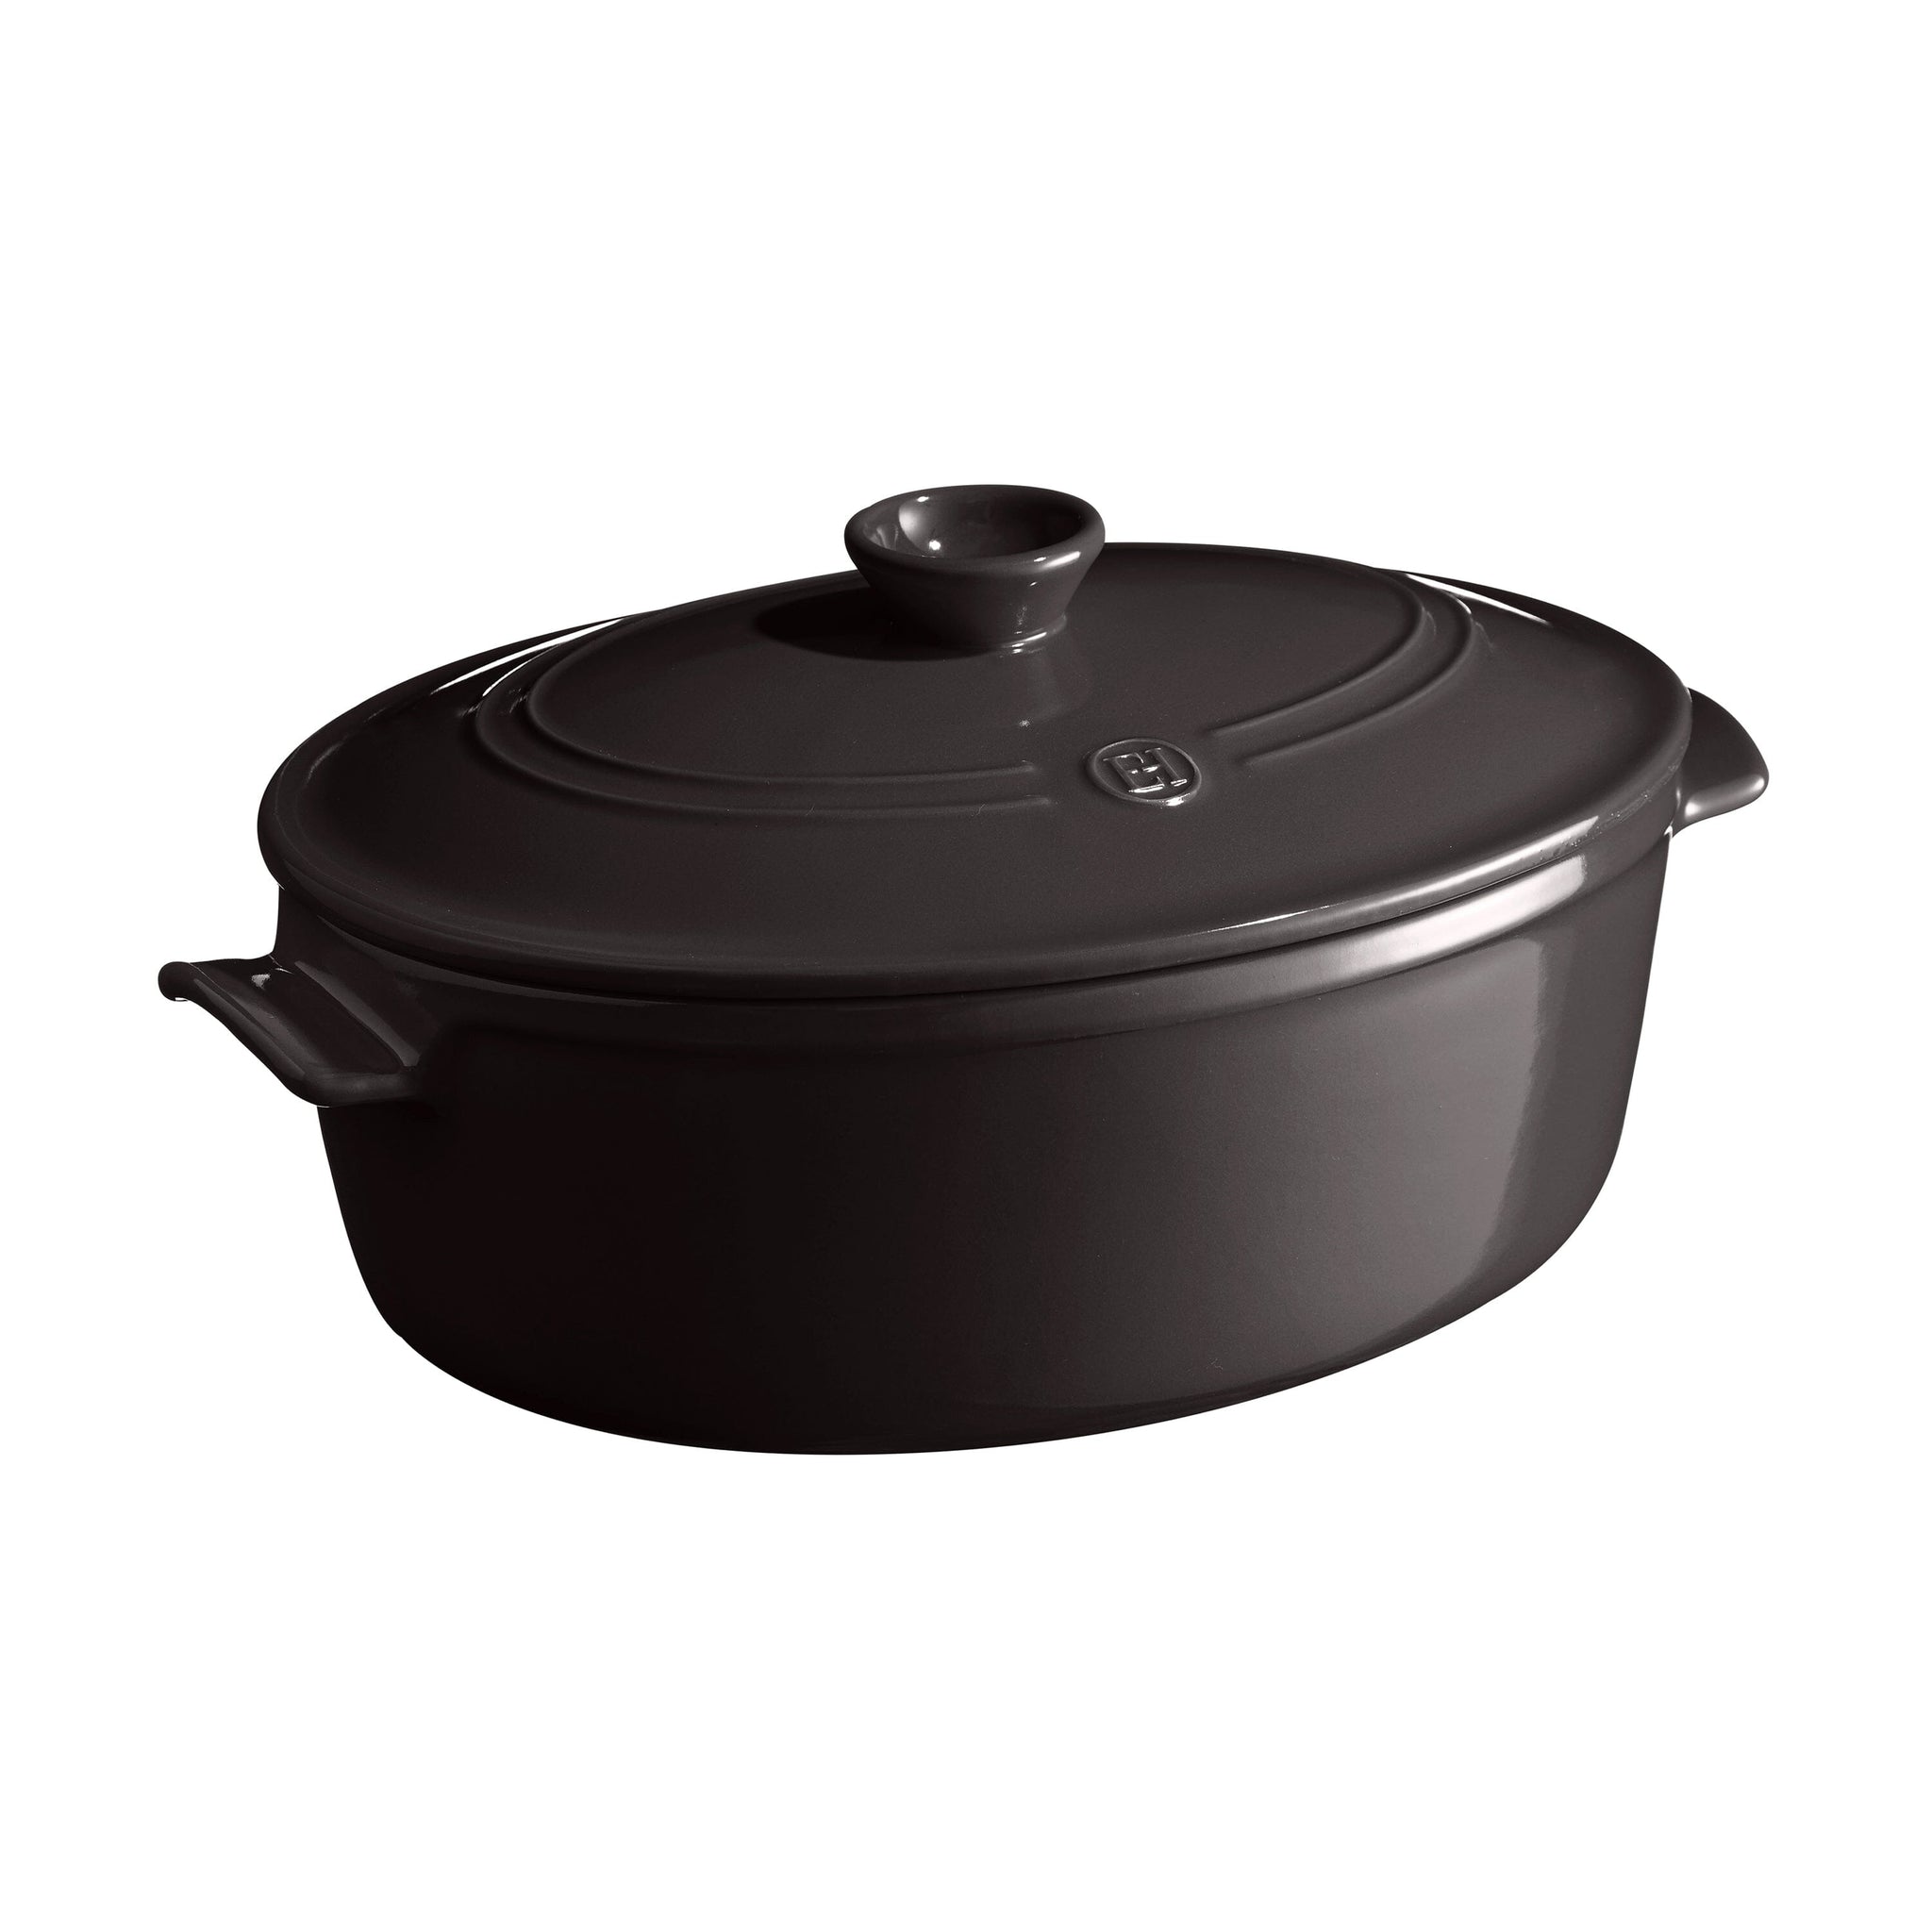 10 Dutch Oven Accessories You Should Have